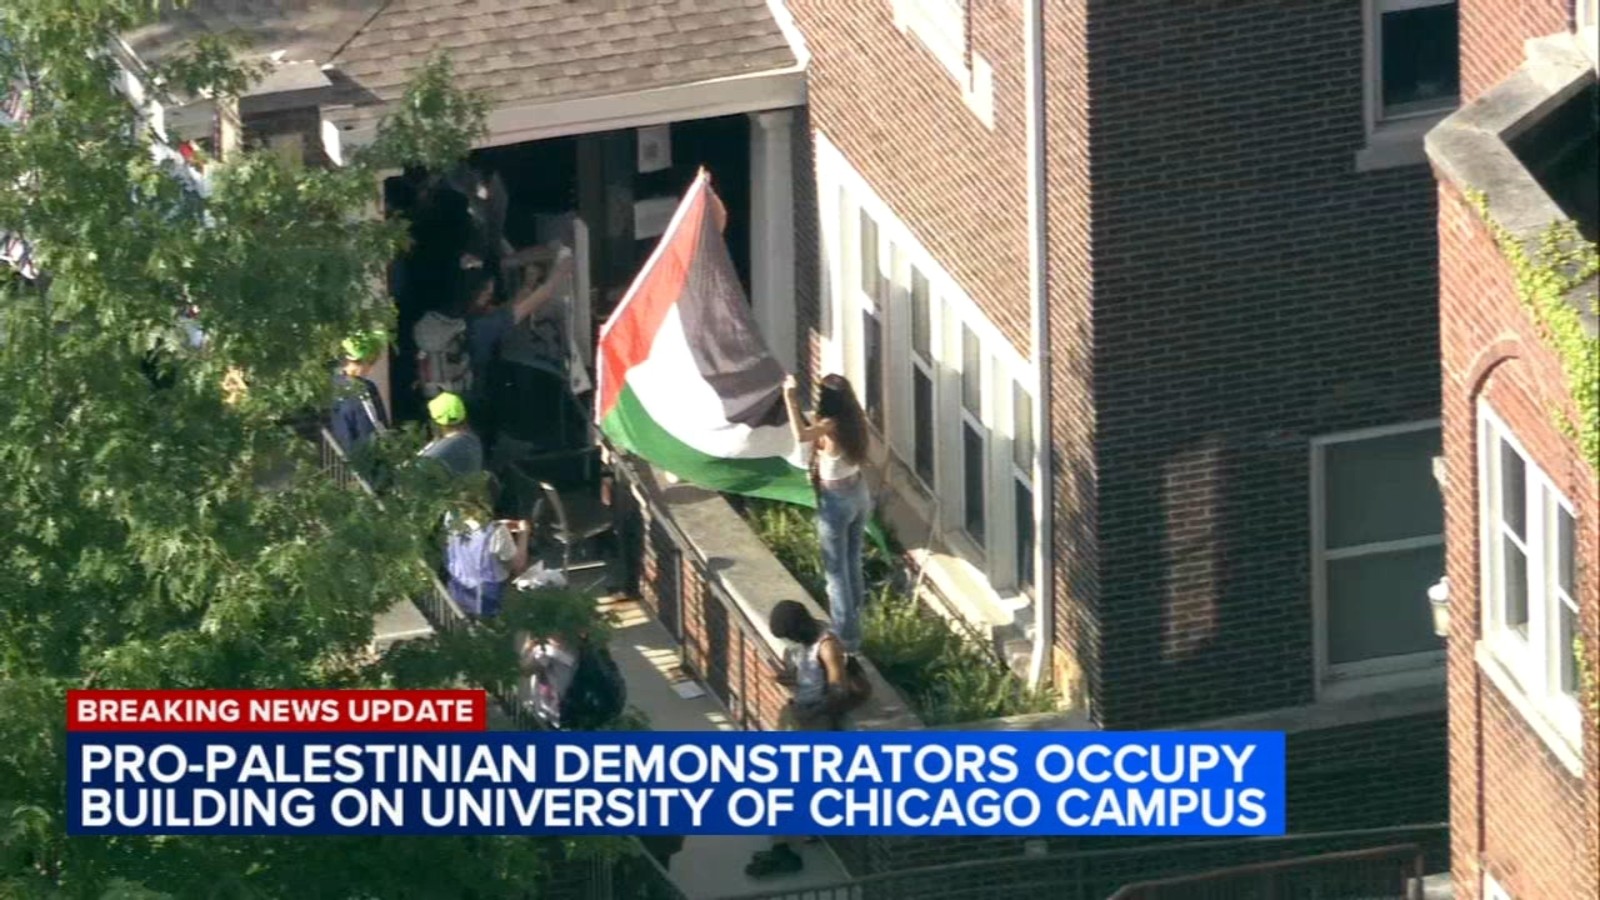 UChicago Institute of Politics surrounded by pro-Palestinian protesters